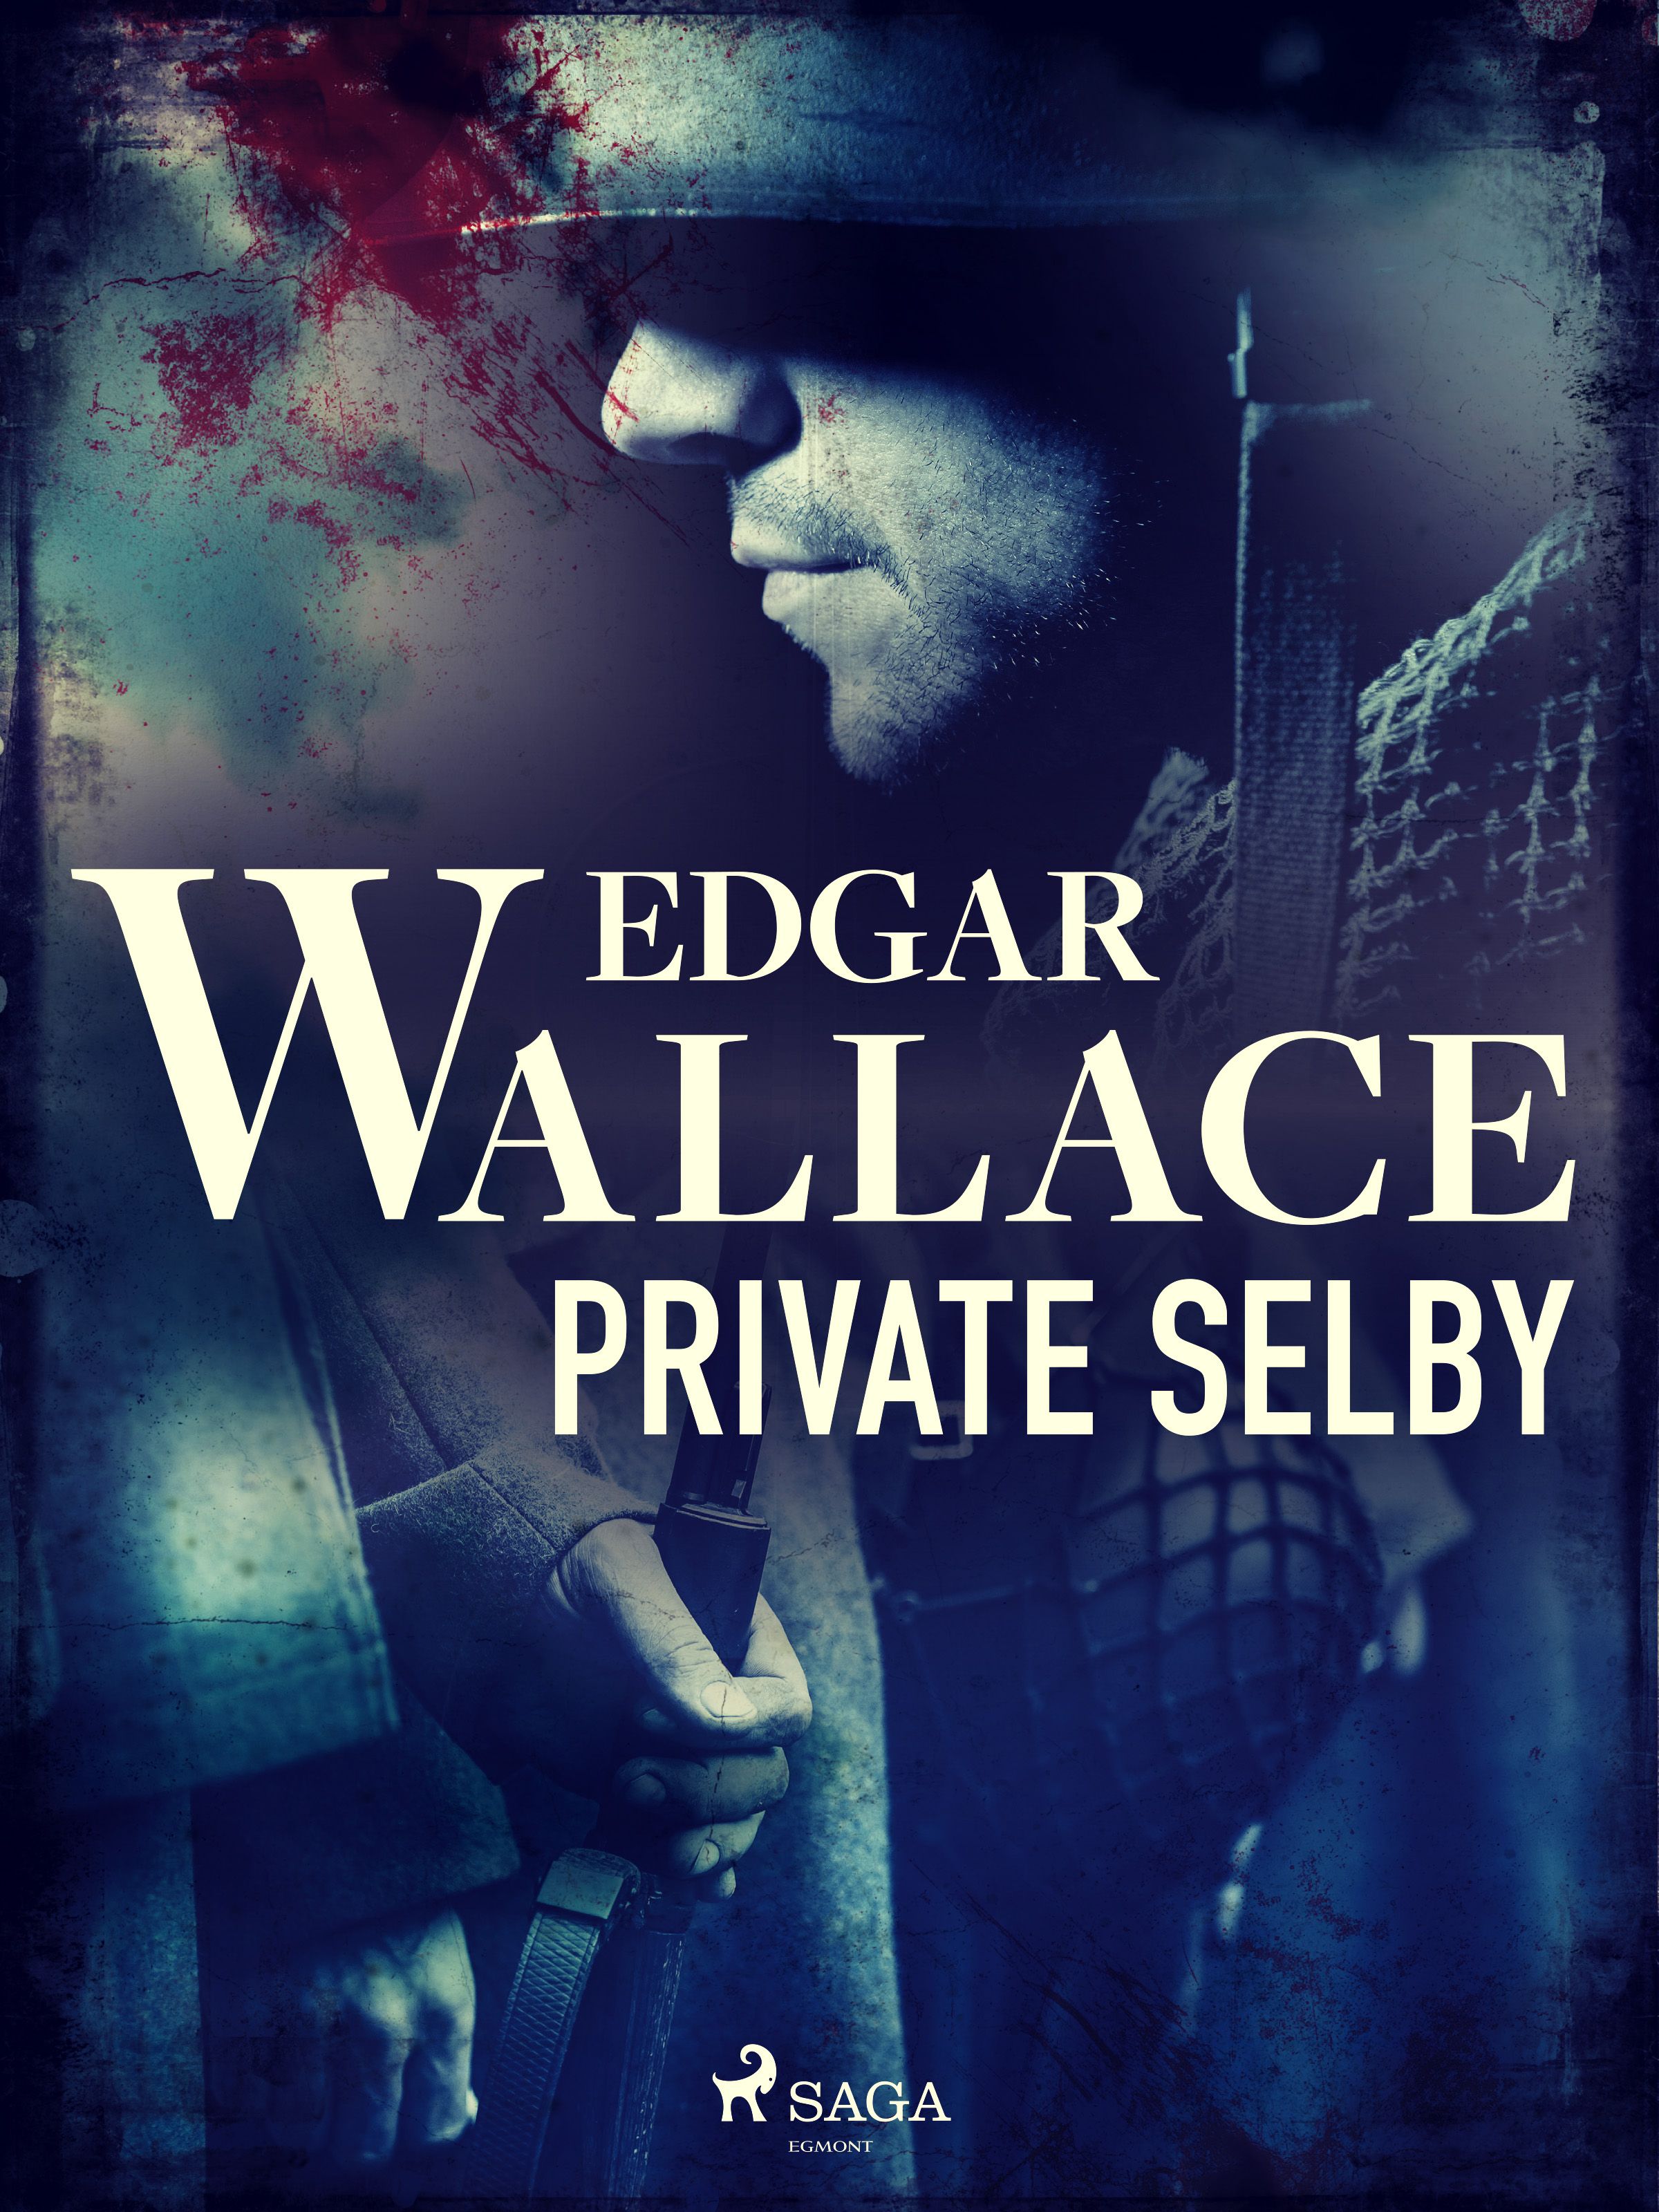 Private Selby, e-bog af Edgar Wallace